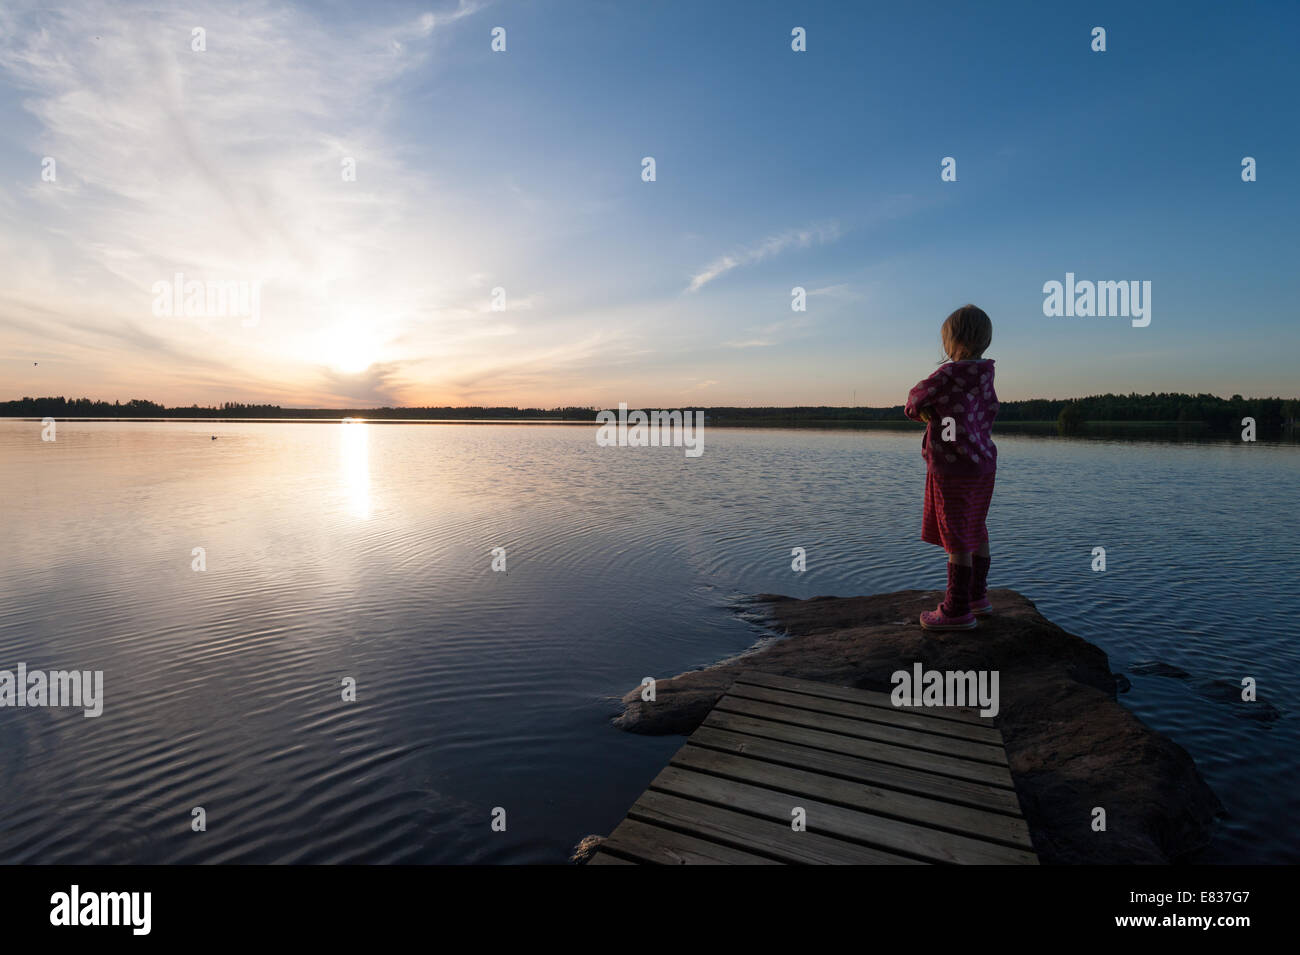 Little child standing by lake shore late summer evening Stock Photo